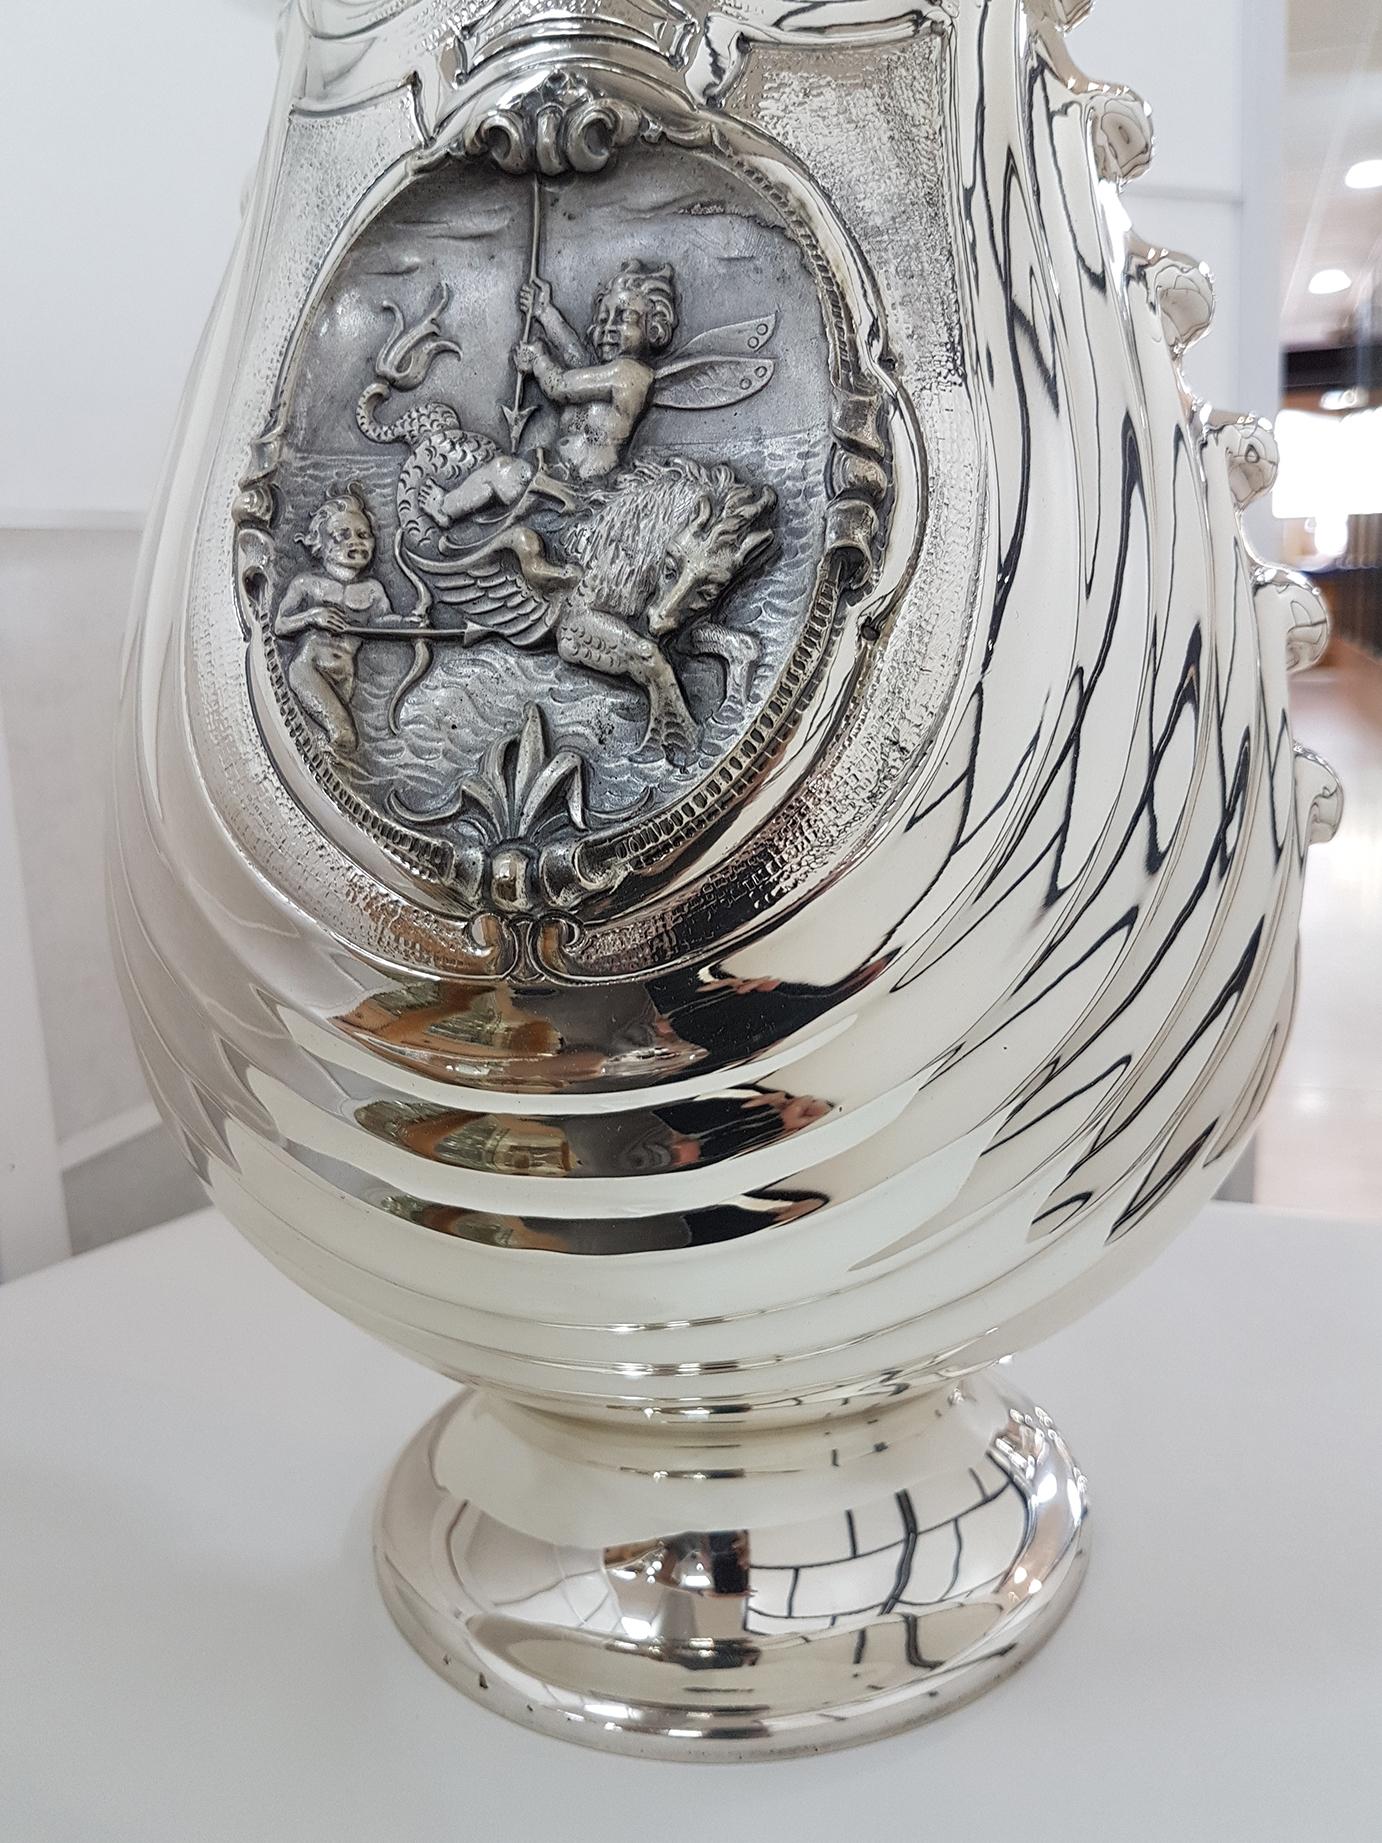 20th Italian Century Solid Silver Big Vase Blason Depicting Mythological Figures In Excellent Condition For Sale In VALENZA, IT